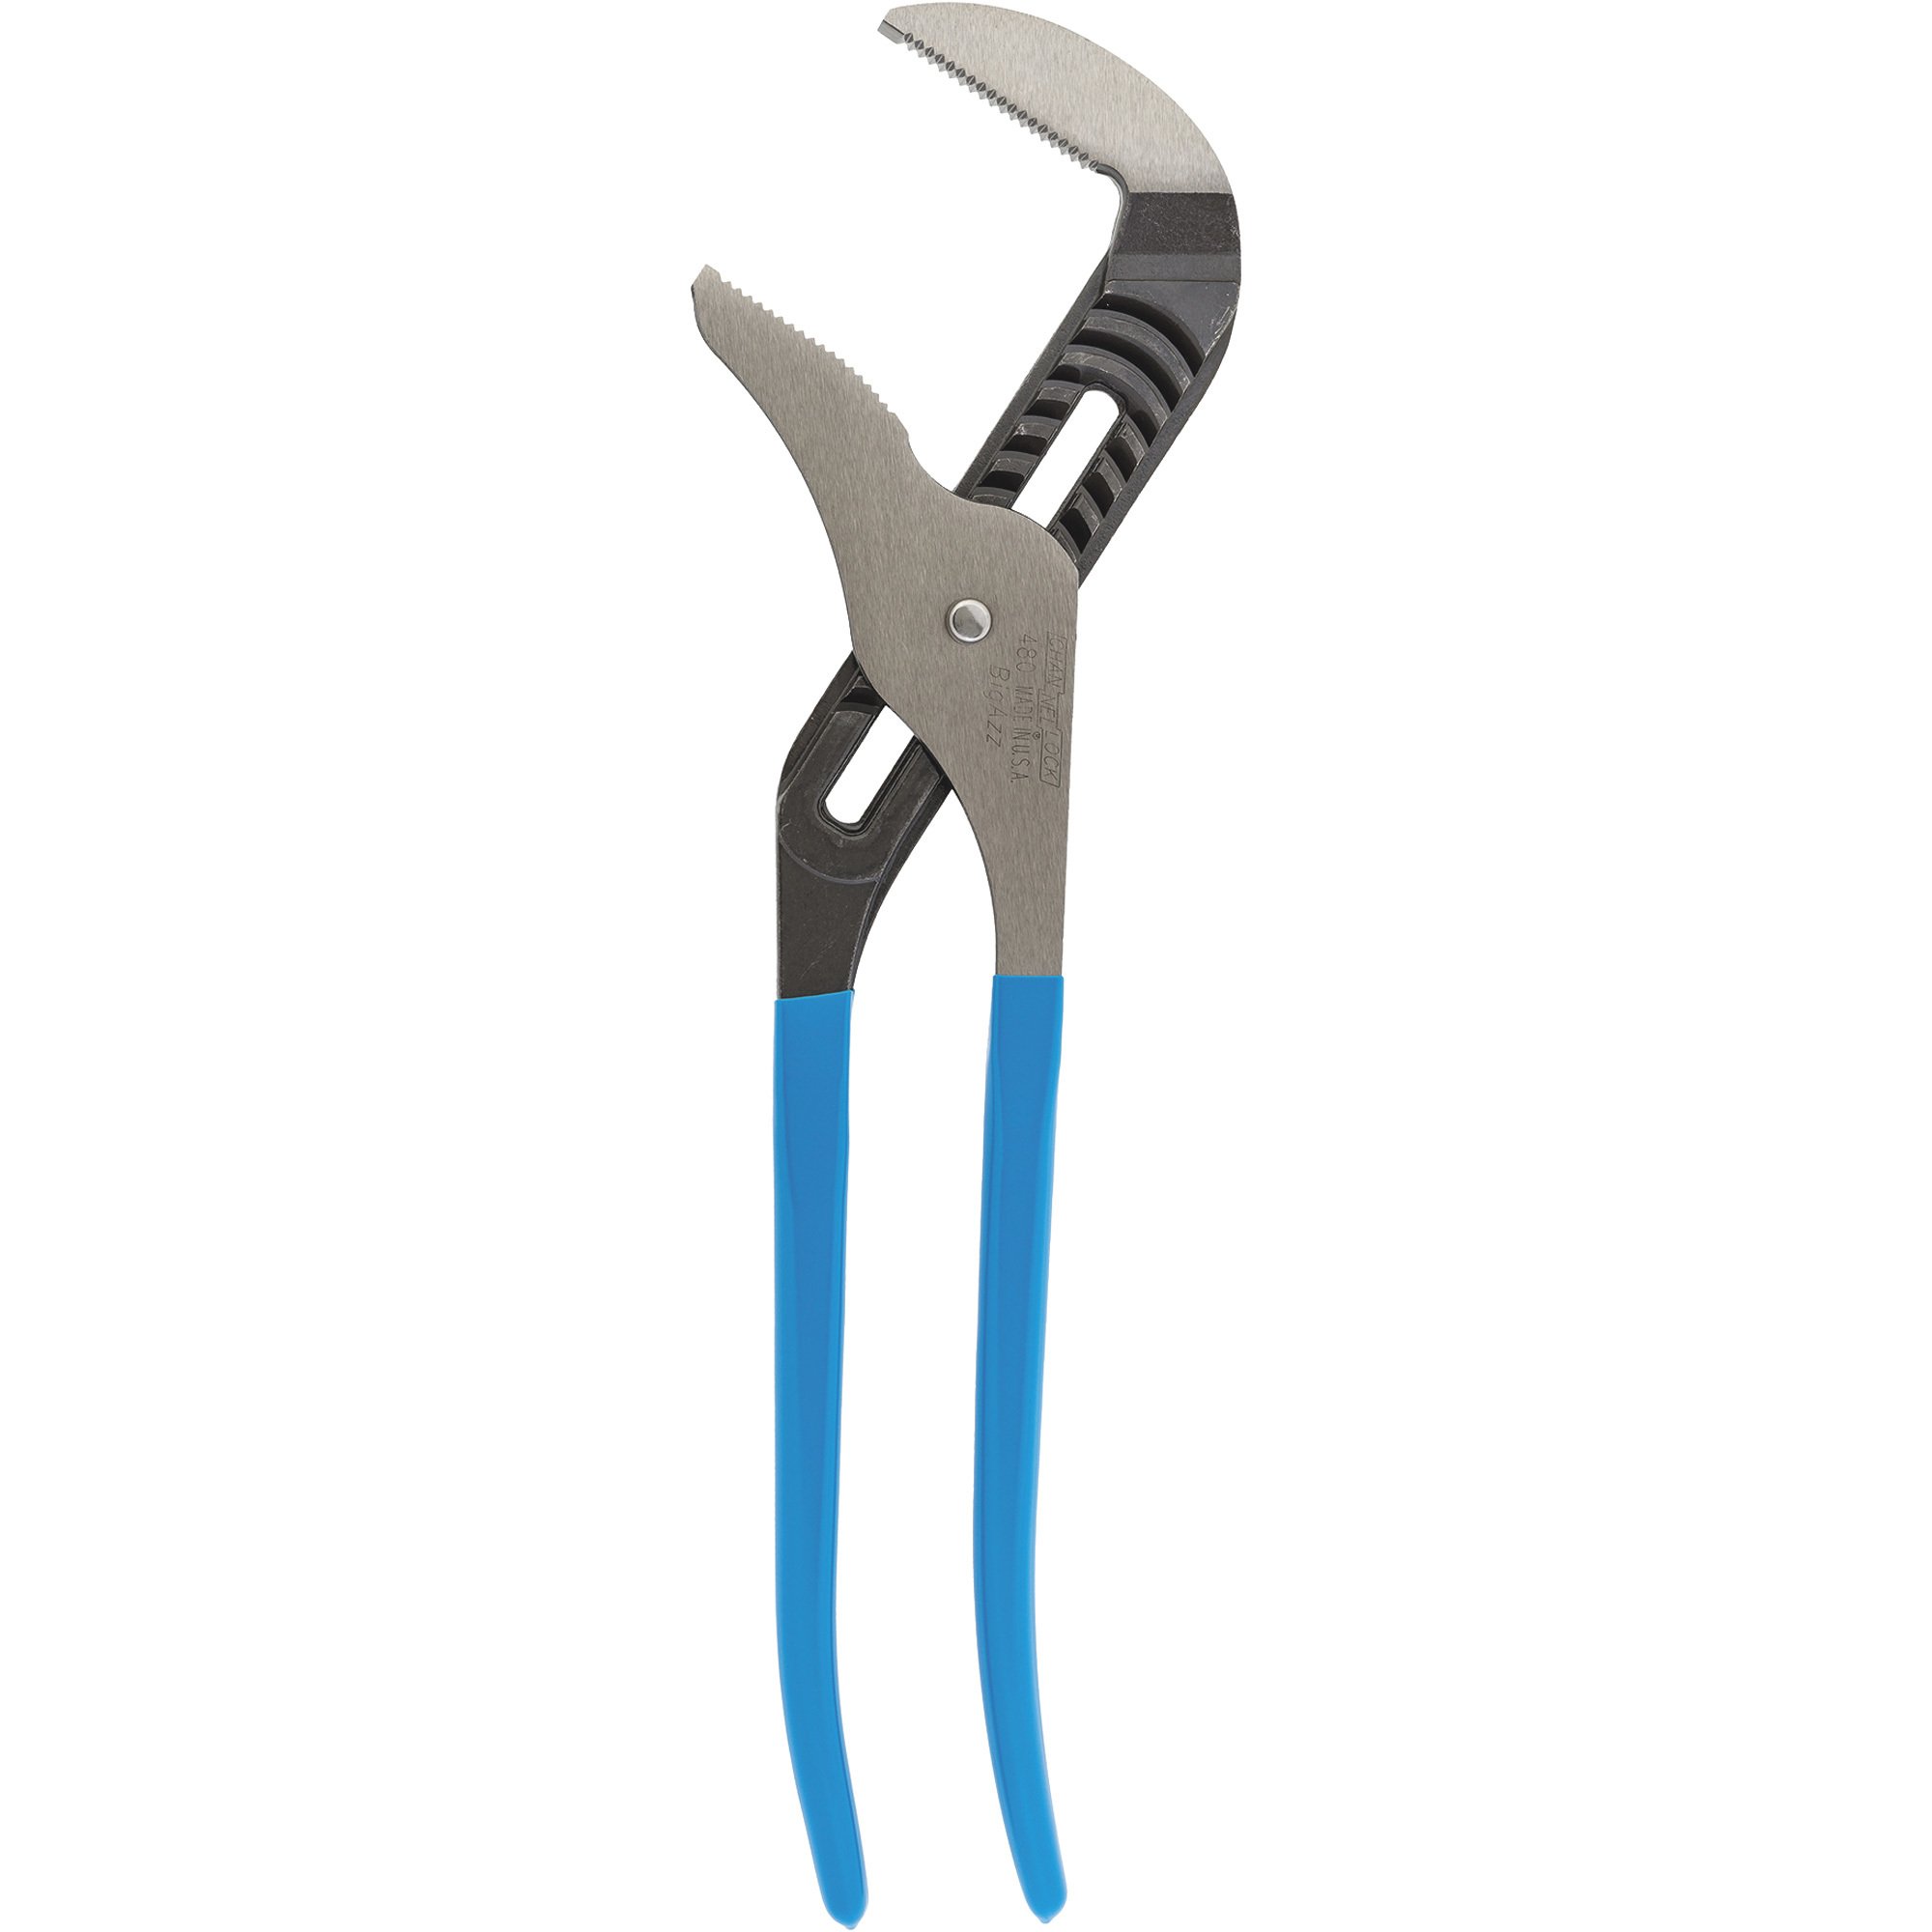 Channellock 20 1/4in. Tongue & Groove Big Azz Pliers